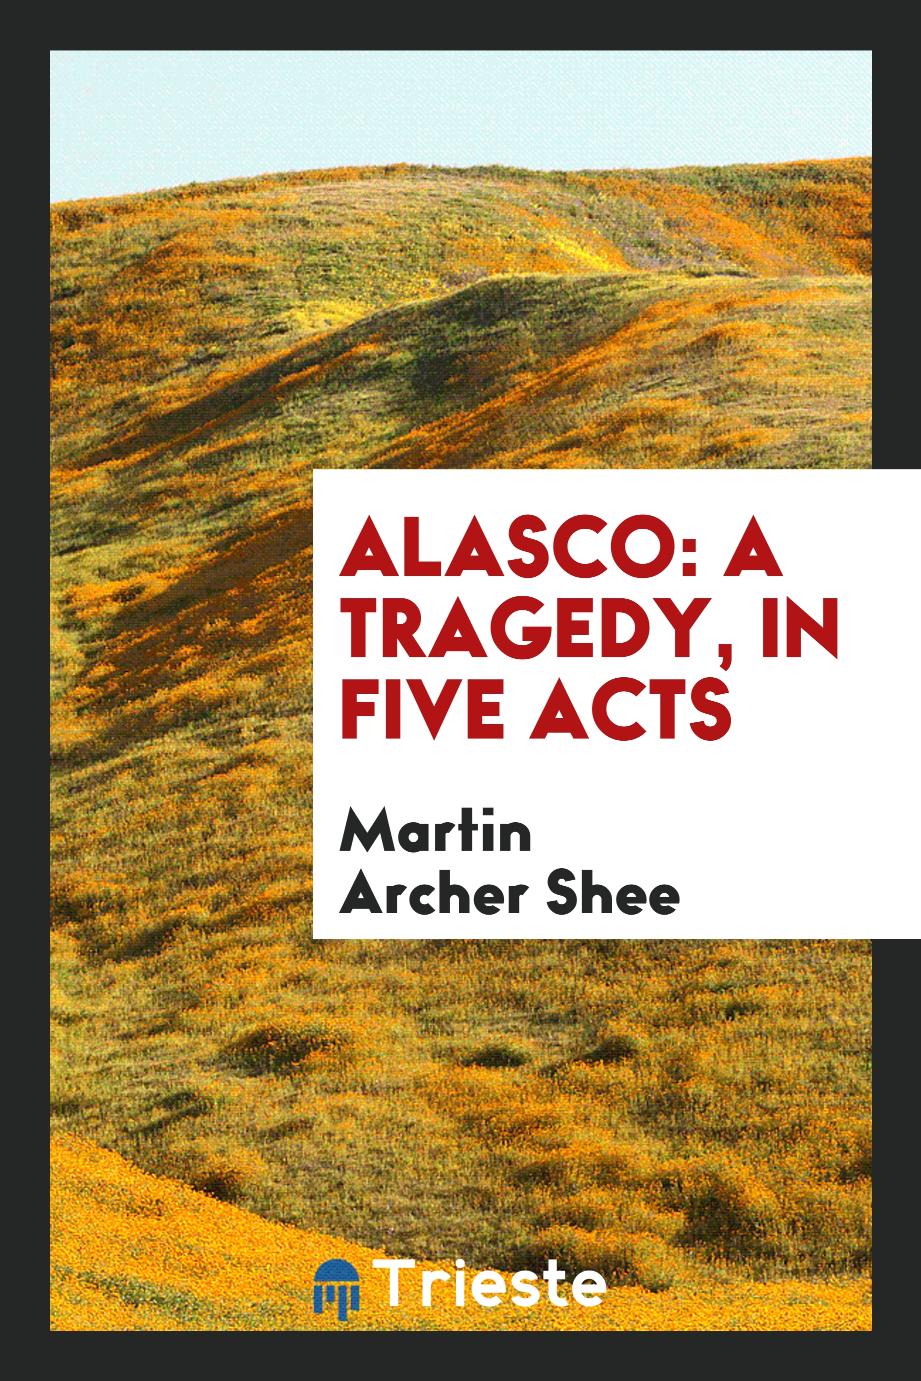 Alasco: A Tragedy, in Five Acts